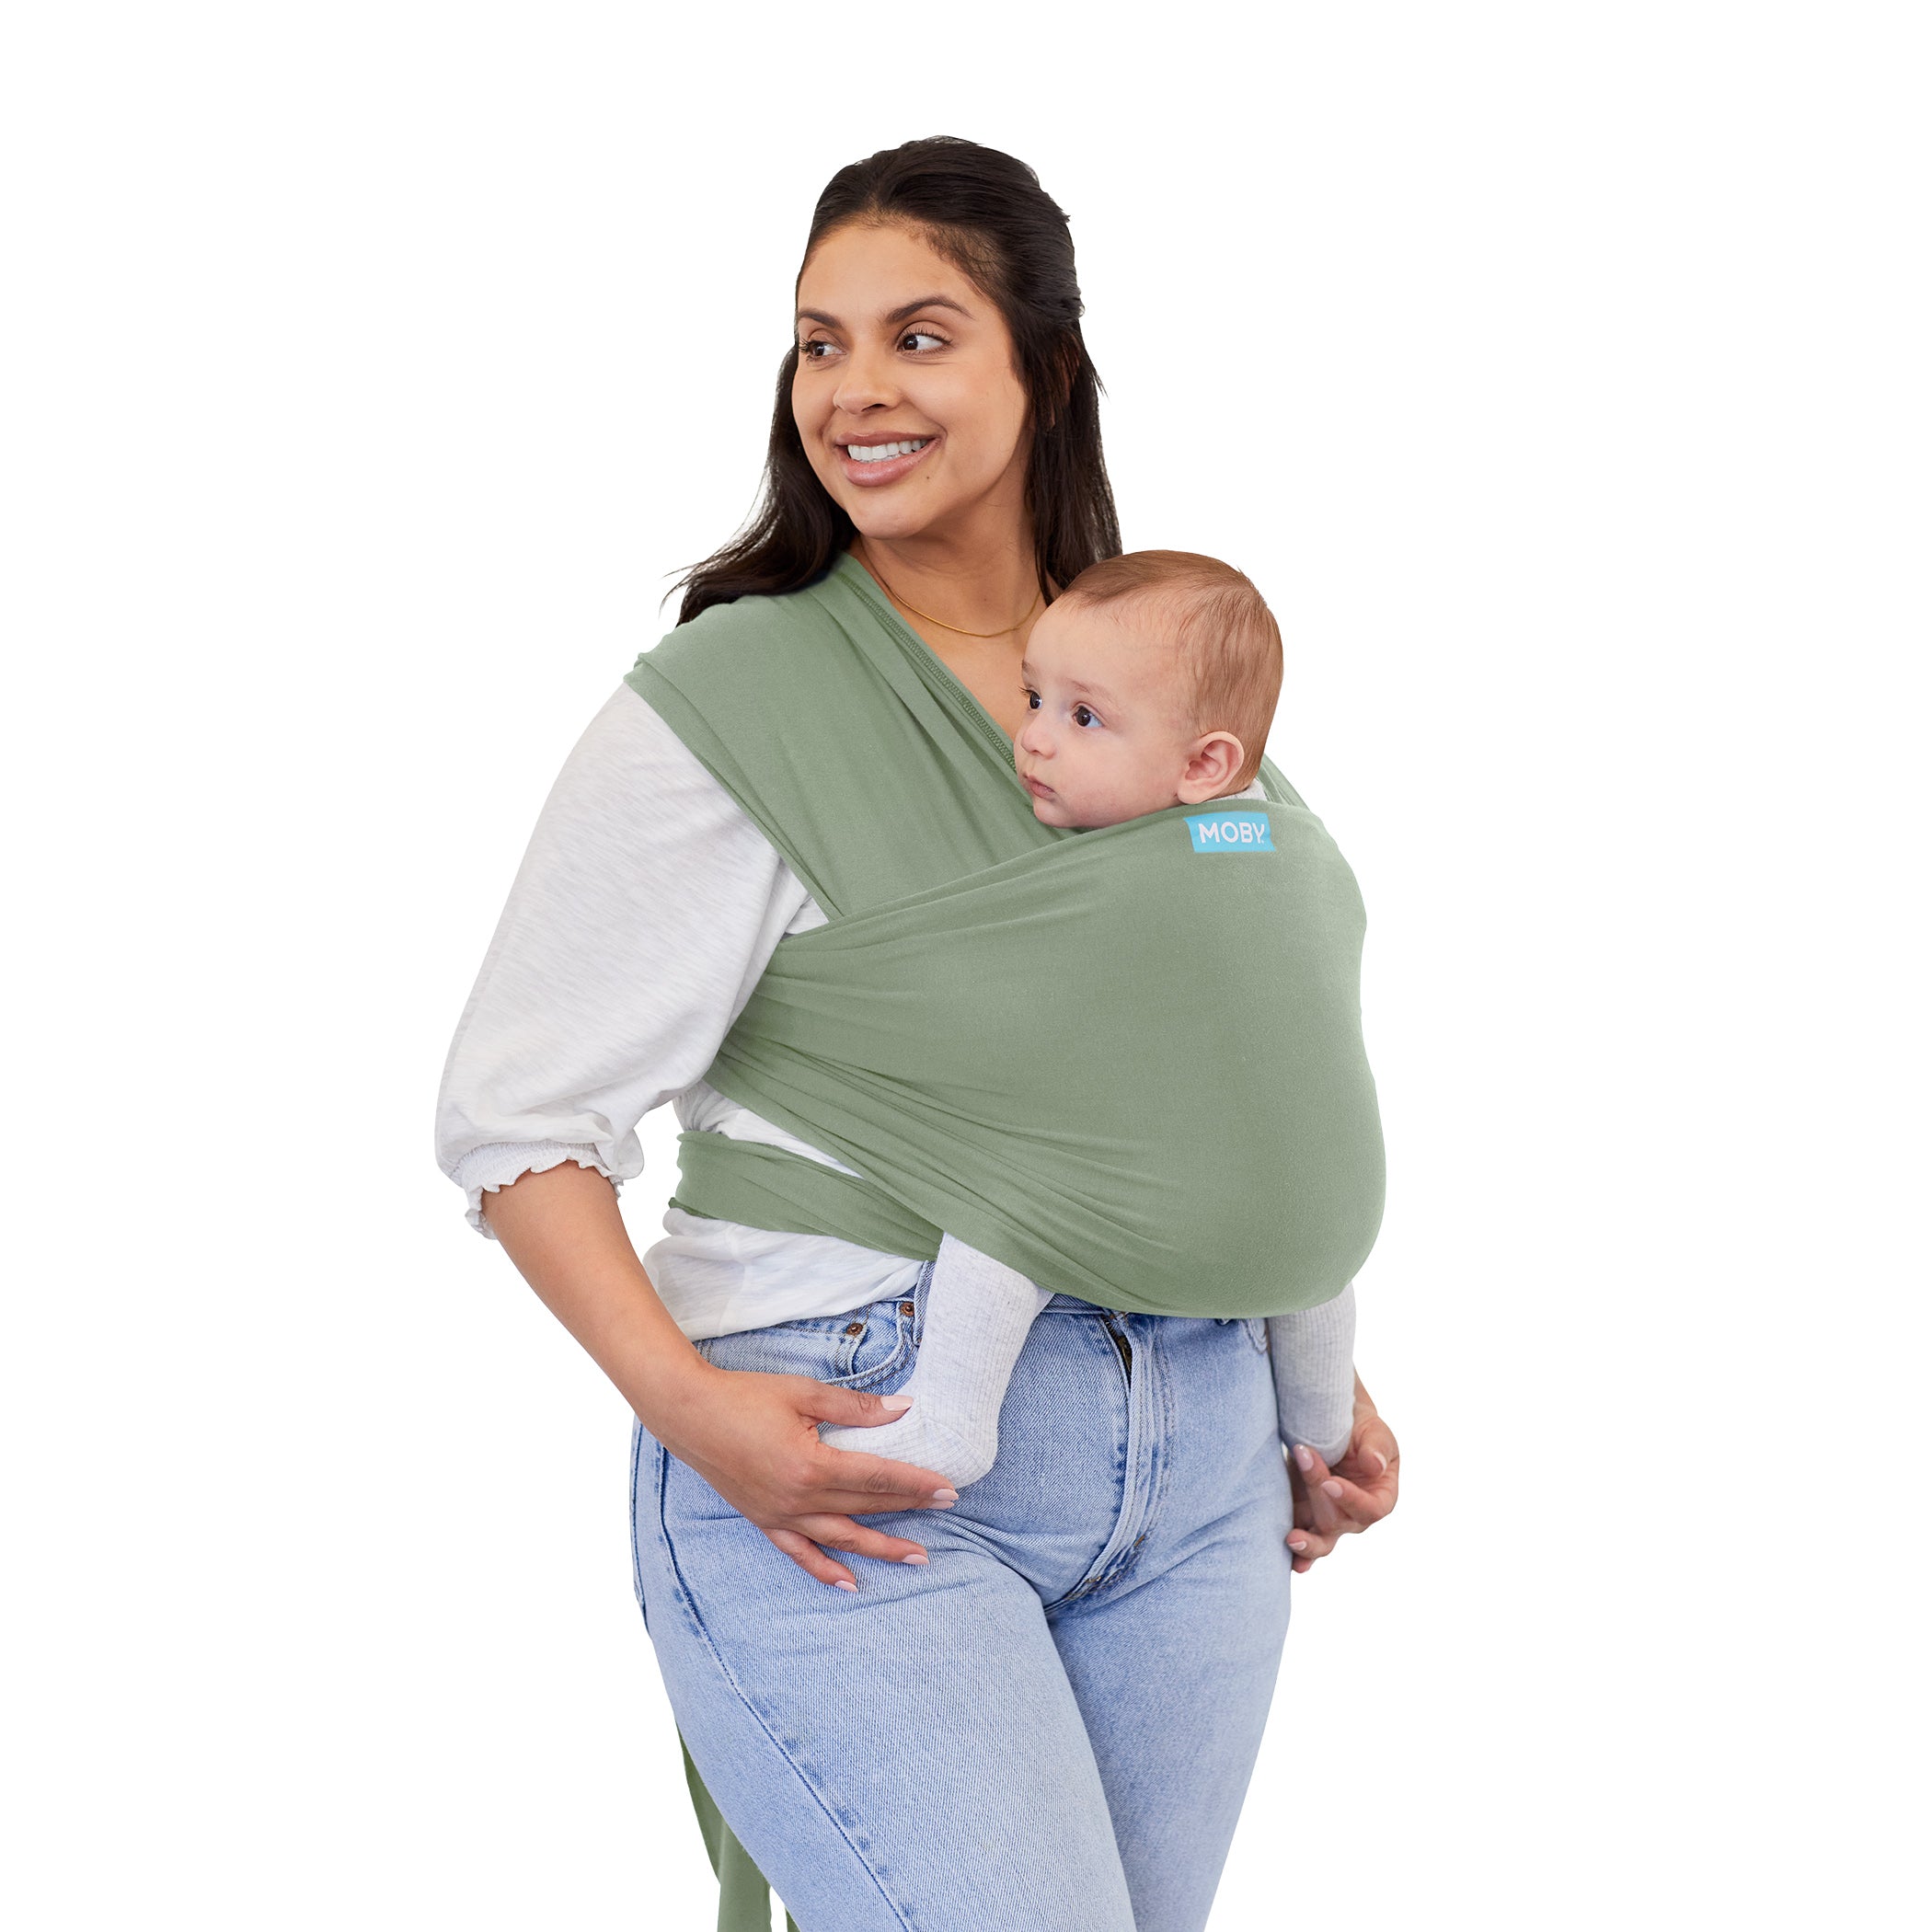 Mom wearing baby in Moby Classic Wrap Baby Carrier in Pear